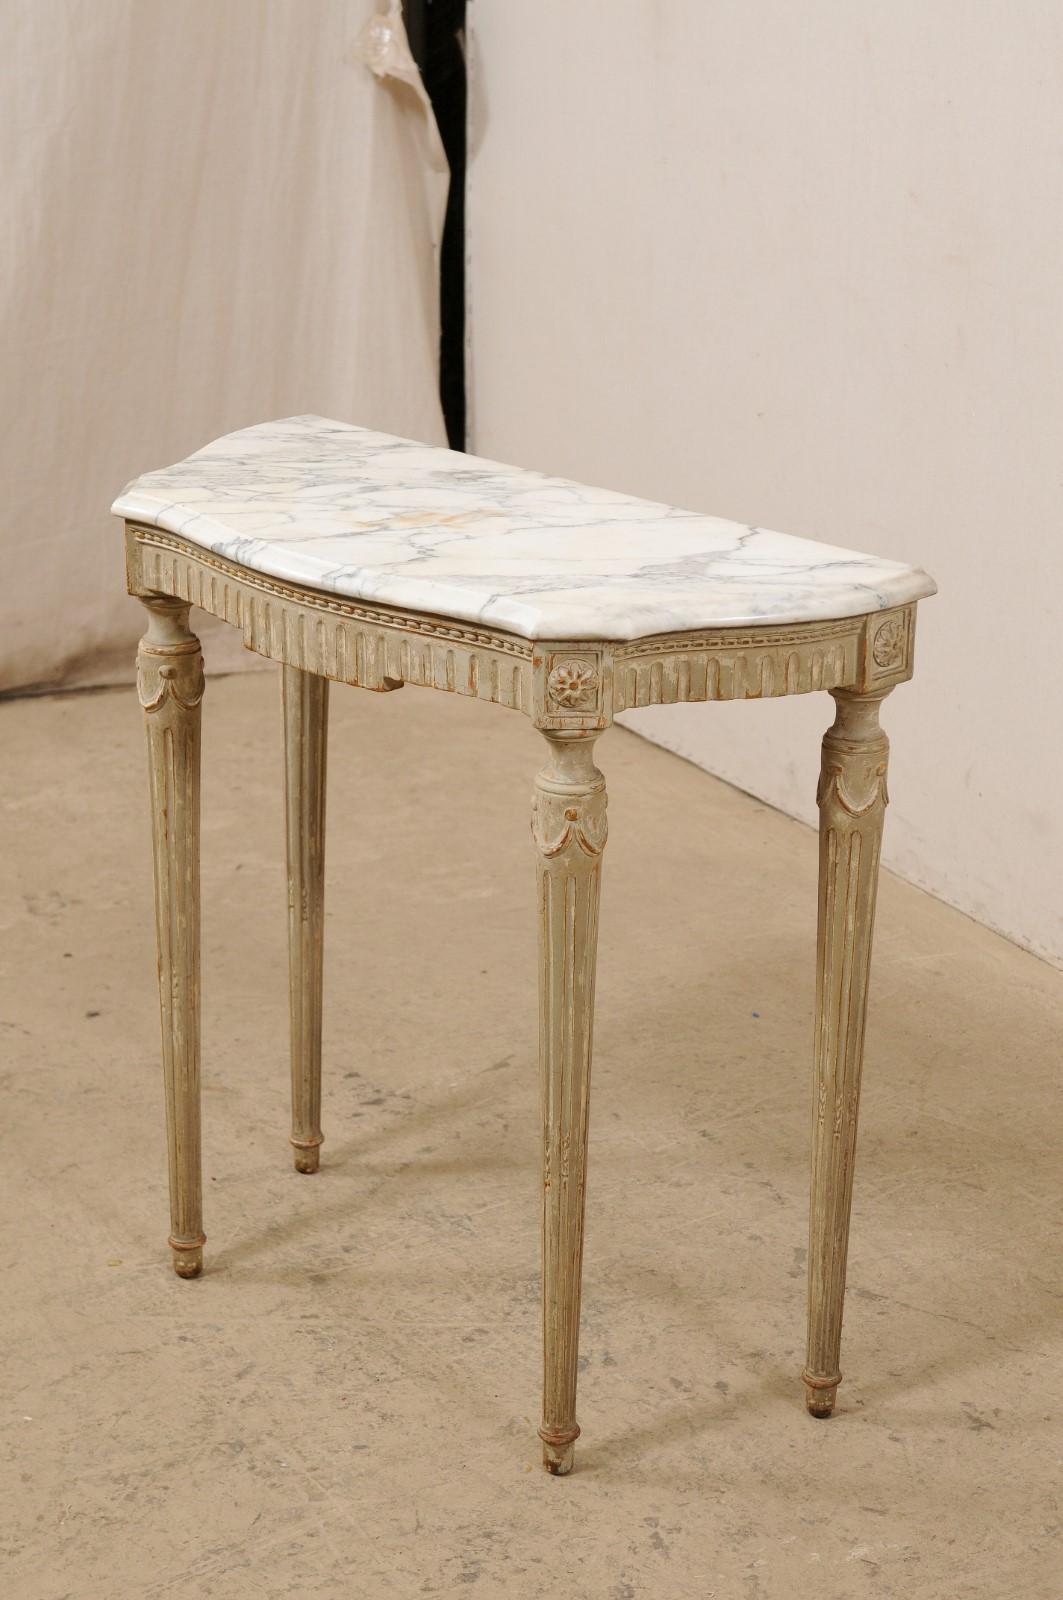 20th Century Cute Sized French Marble Top & Carved Wood Console Table, Turn of 19th/20th C.